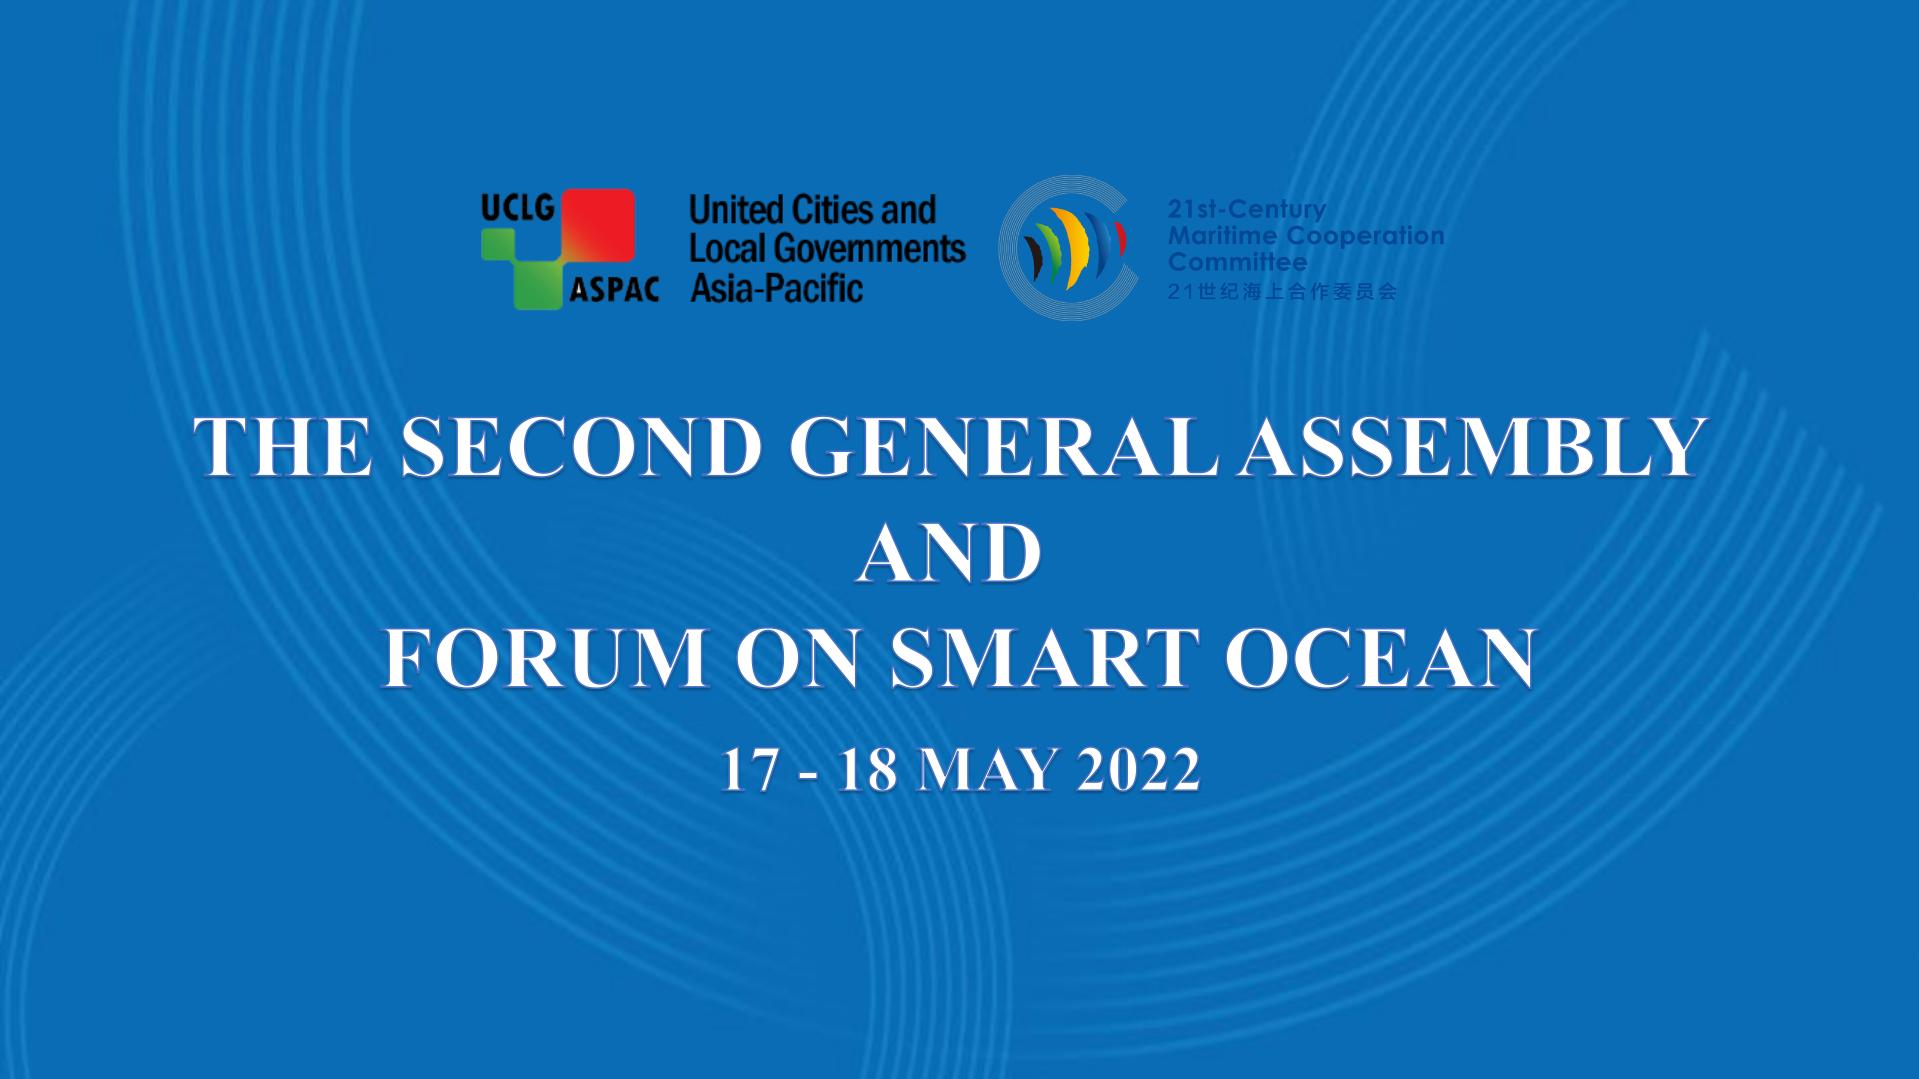 The Second General Assembly of 21st-Century Maritime Cooperation Committee and Forum on Smart Ocean